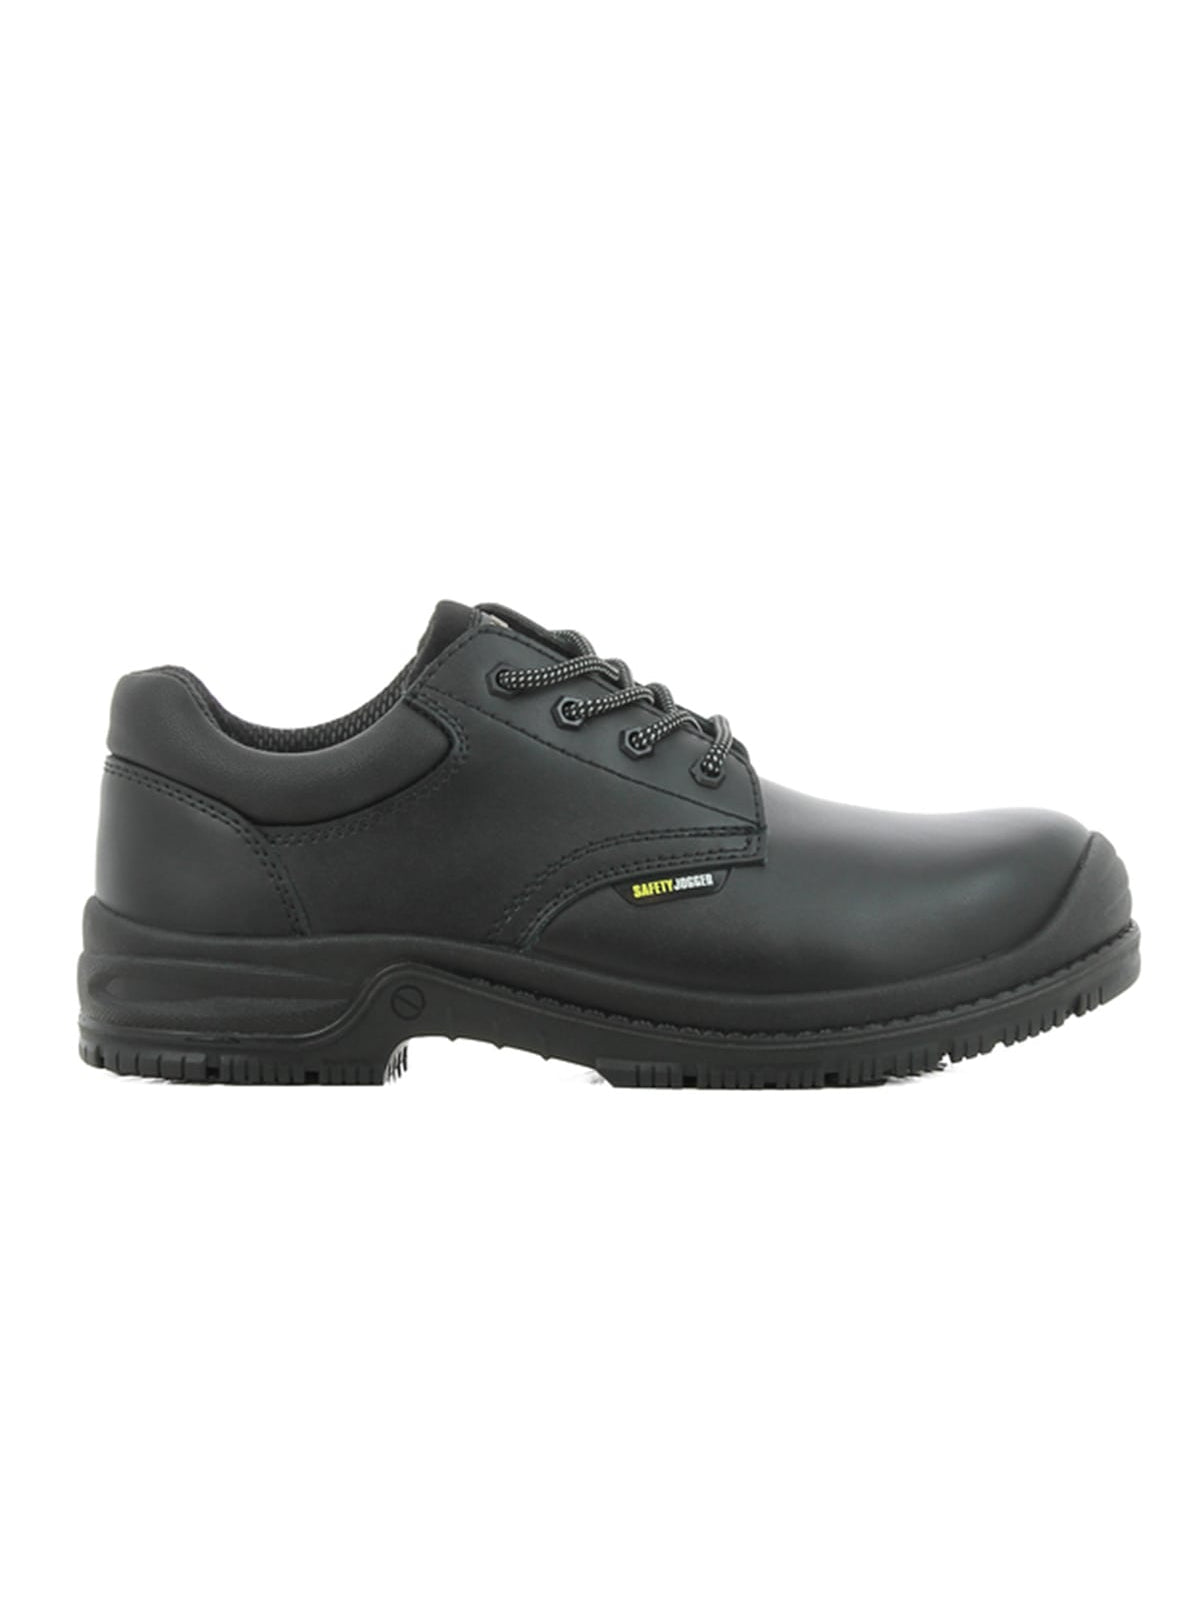 Unisex Safety Shoe X111081 (S3) by  Shoes For Crews.